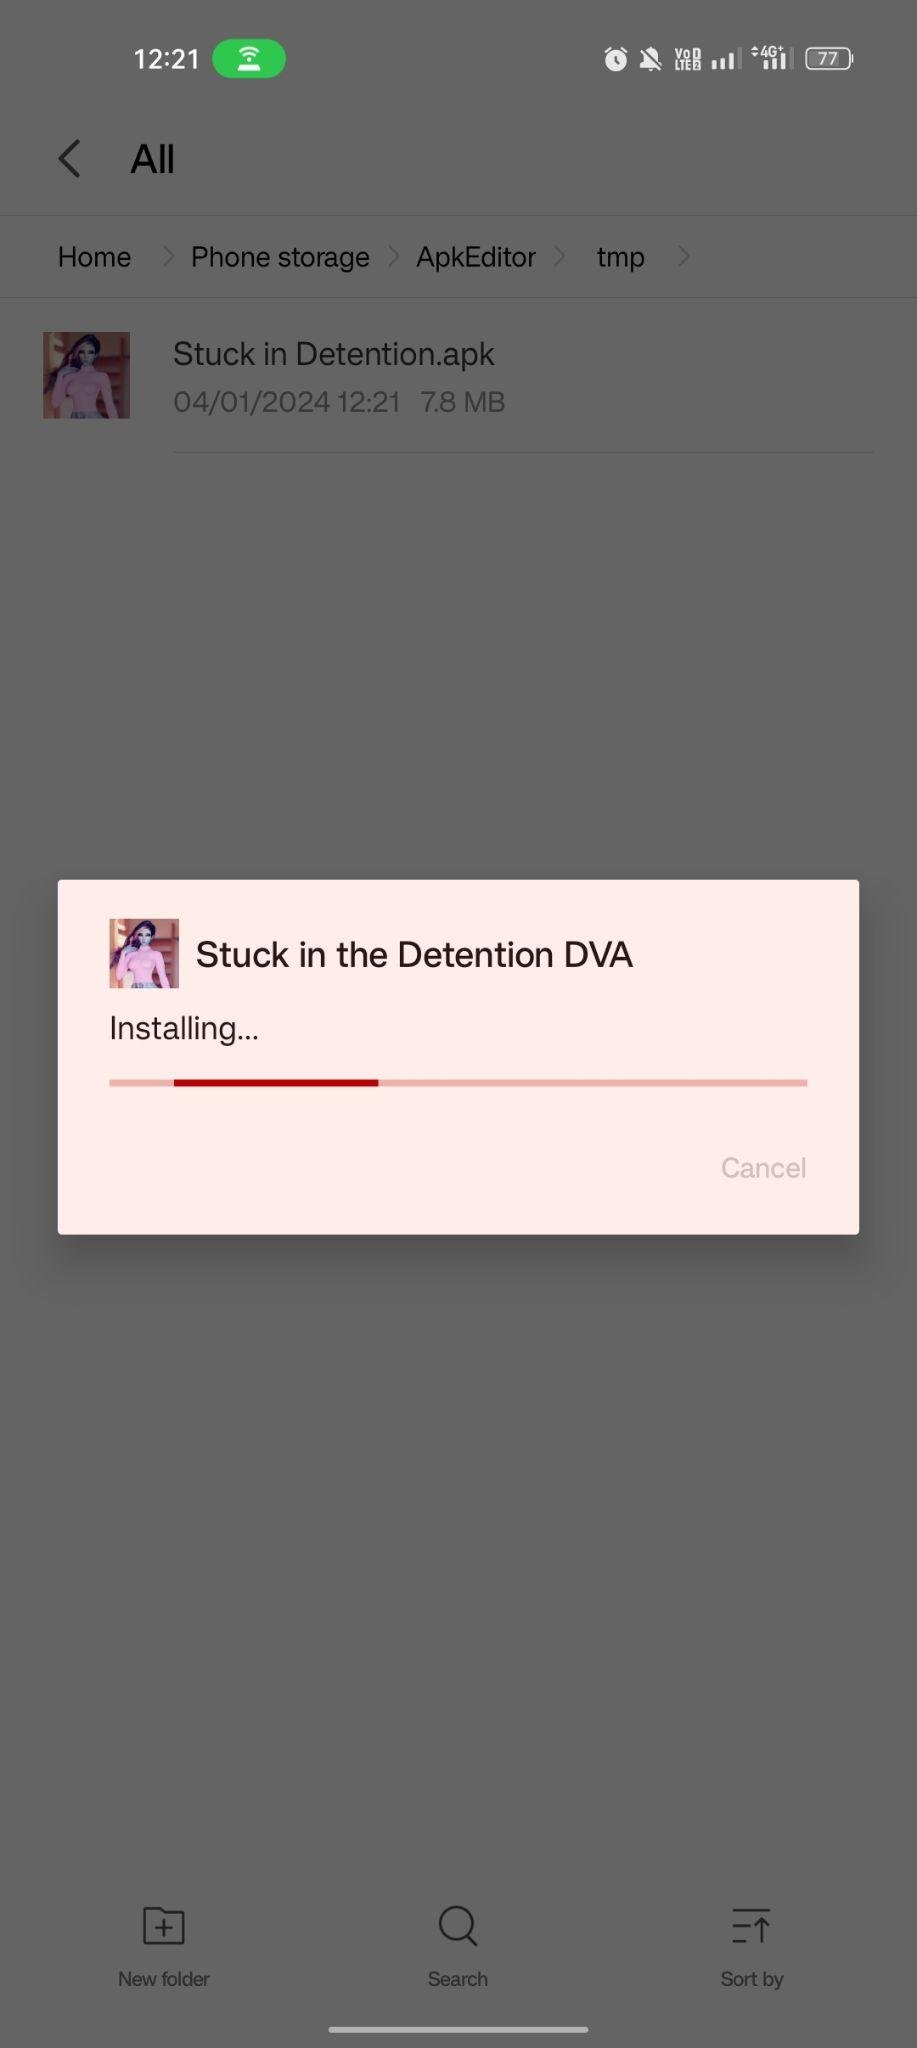 Stuck in Detention with DVA apk installing